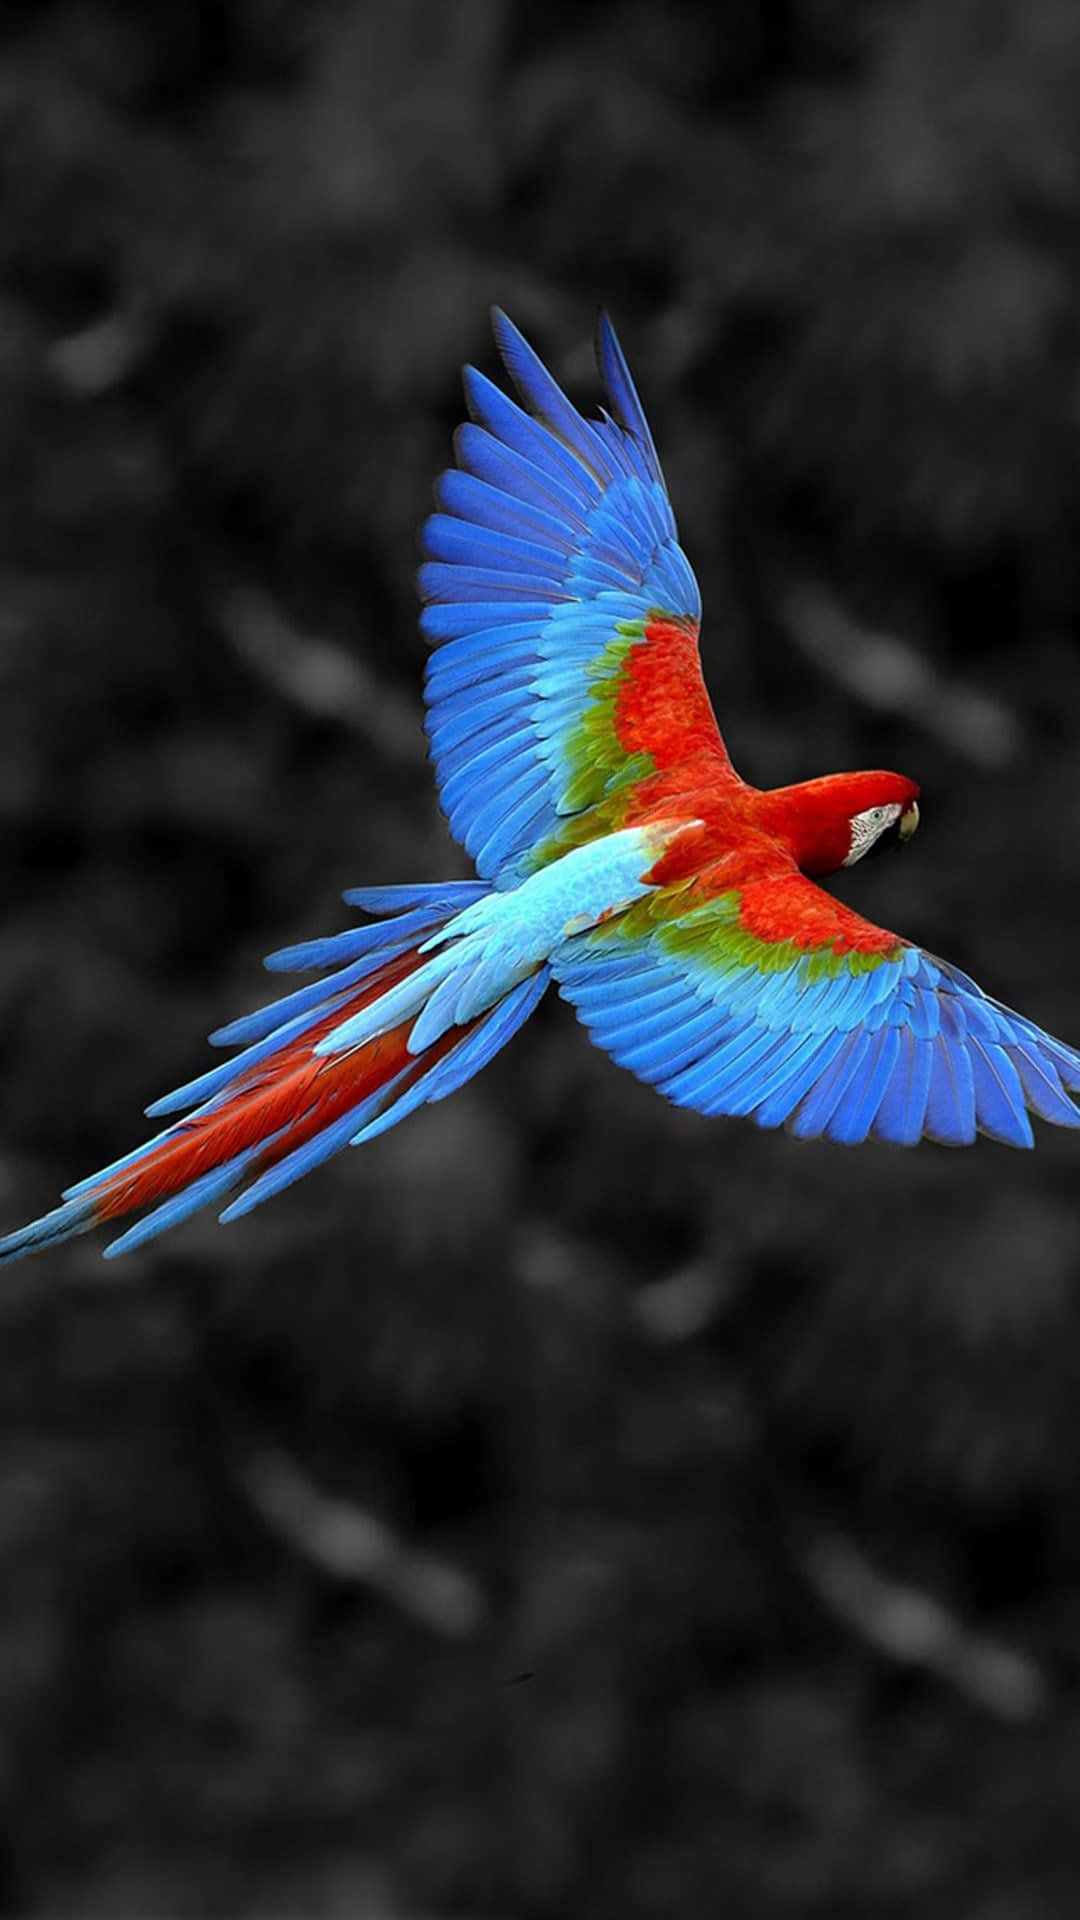 Flying Colorful Parrot Bird Iphone Image Wallpaper